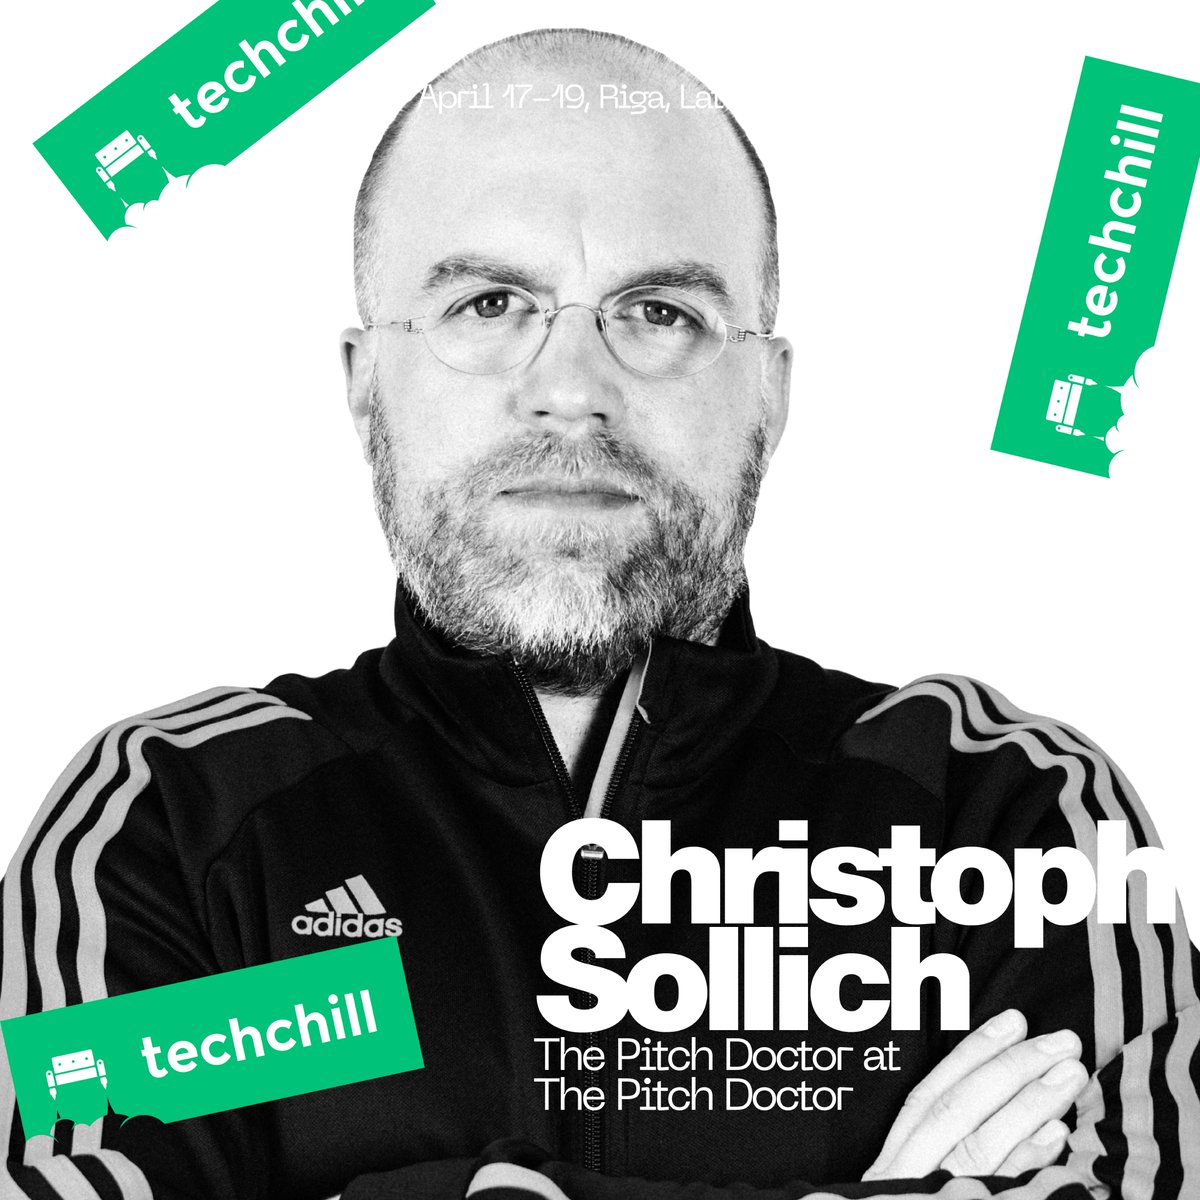 Excited to welcome Christoph Sollich, @pitchdoctor as a speaker for TechChill 2024! With 11+ years' experience helping 2500+ startups hone their pitches, his insights are invaluable. Don't miss his engaging talks in Riga, April 17-19! 🚀 Tickets: techchill.co/get-pass